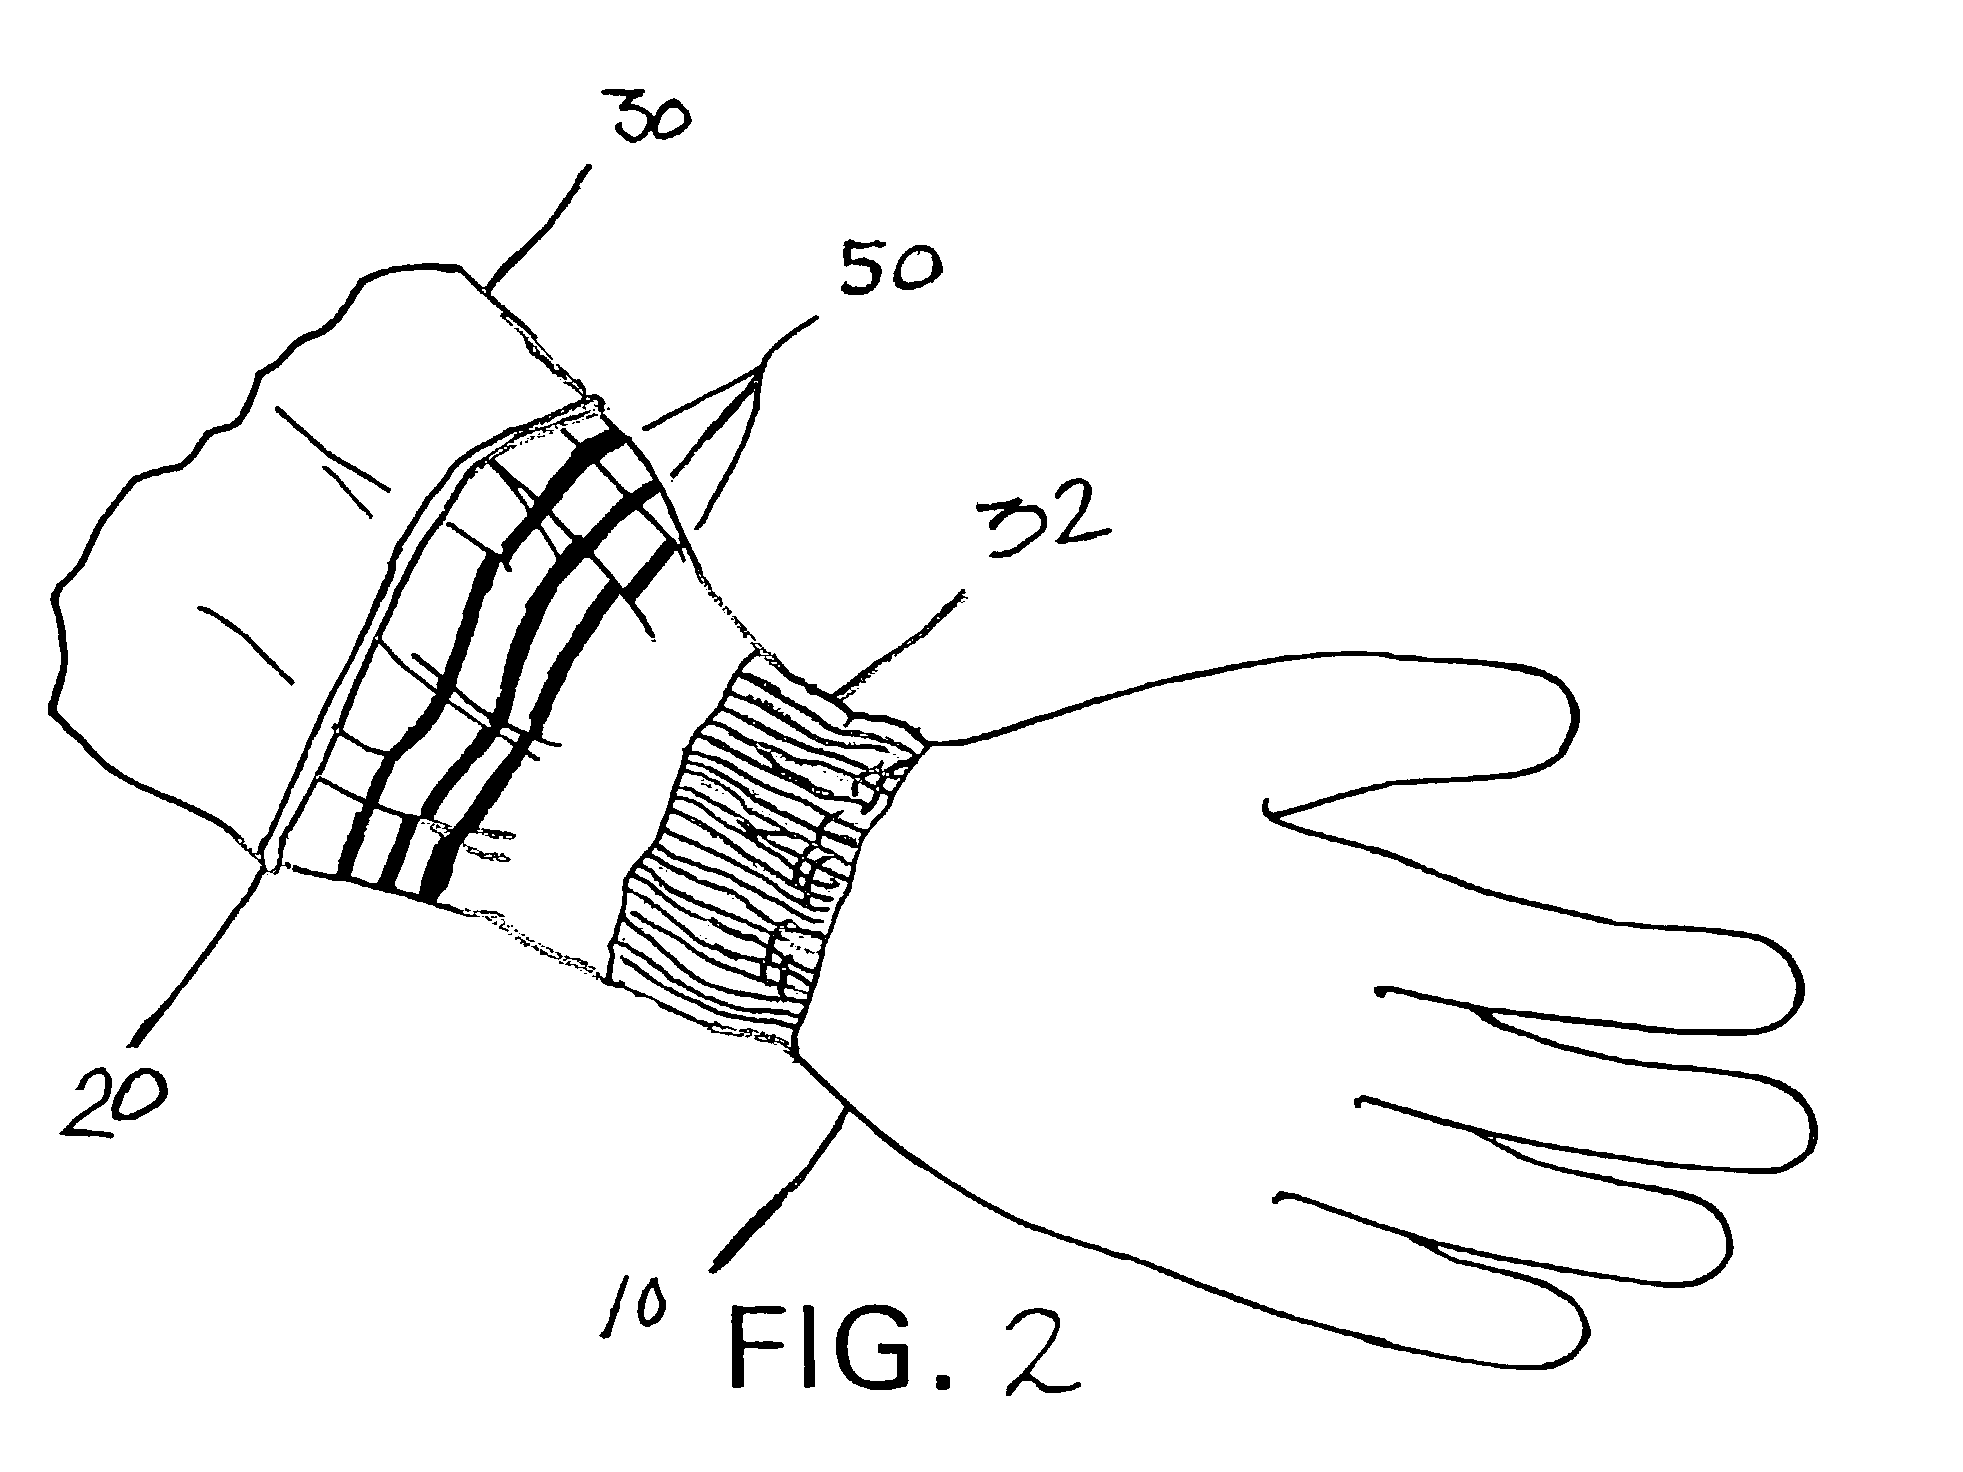 Anti-wicking protective workwear and methods of making and using same